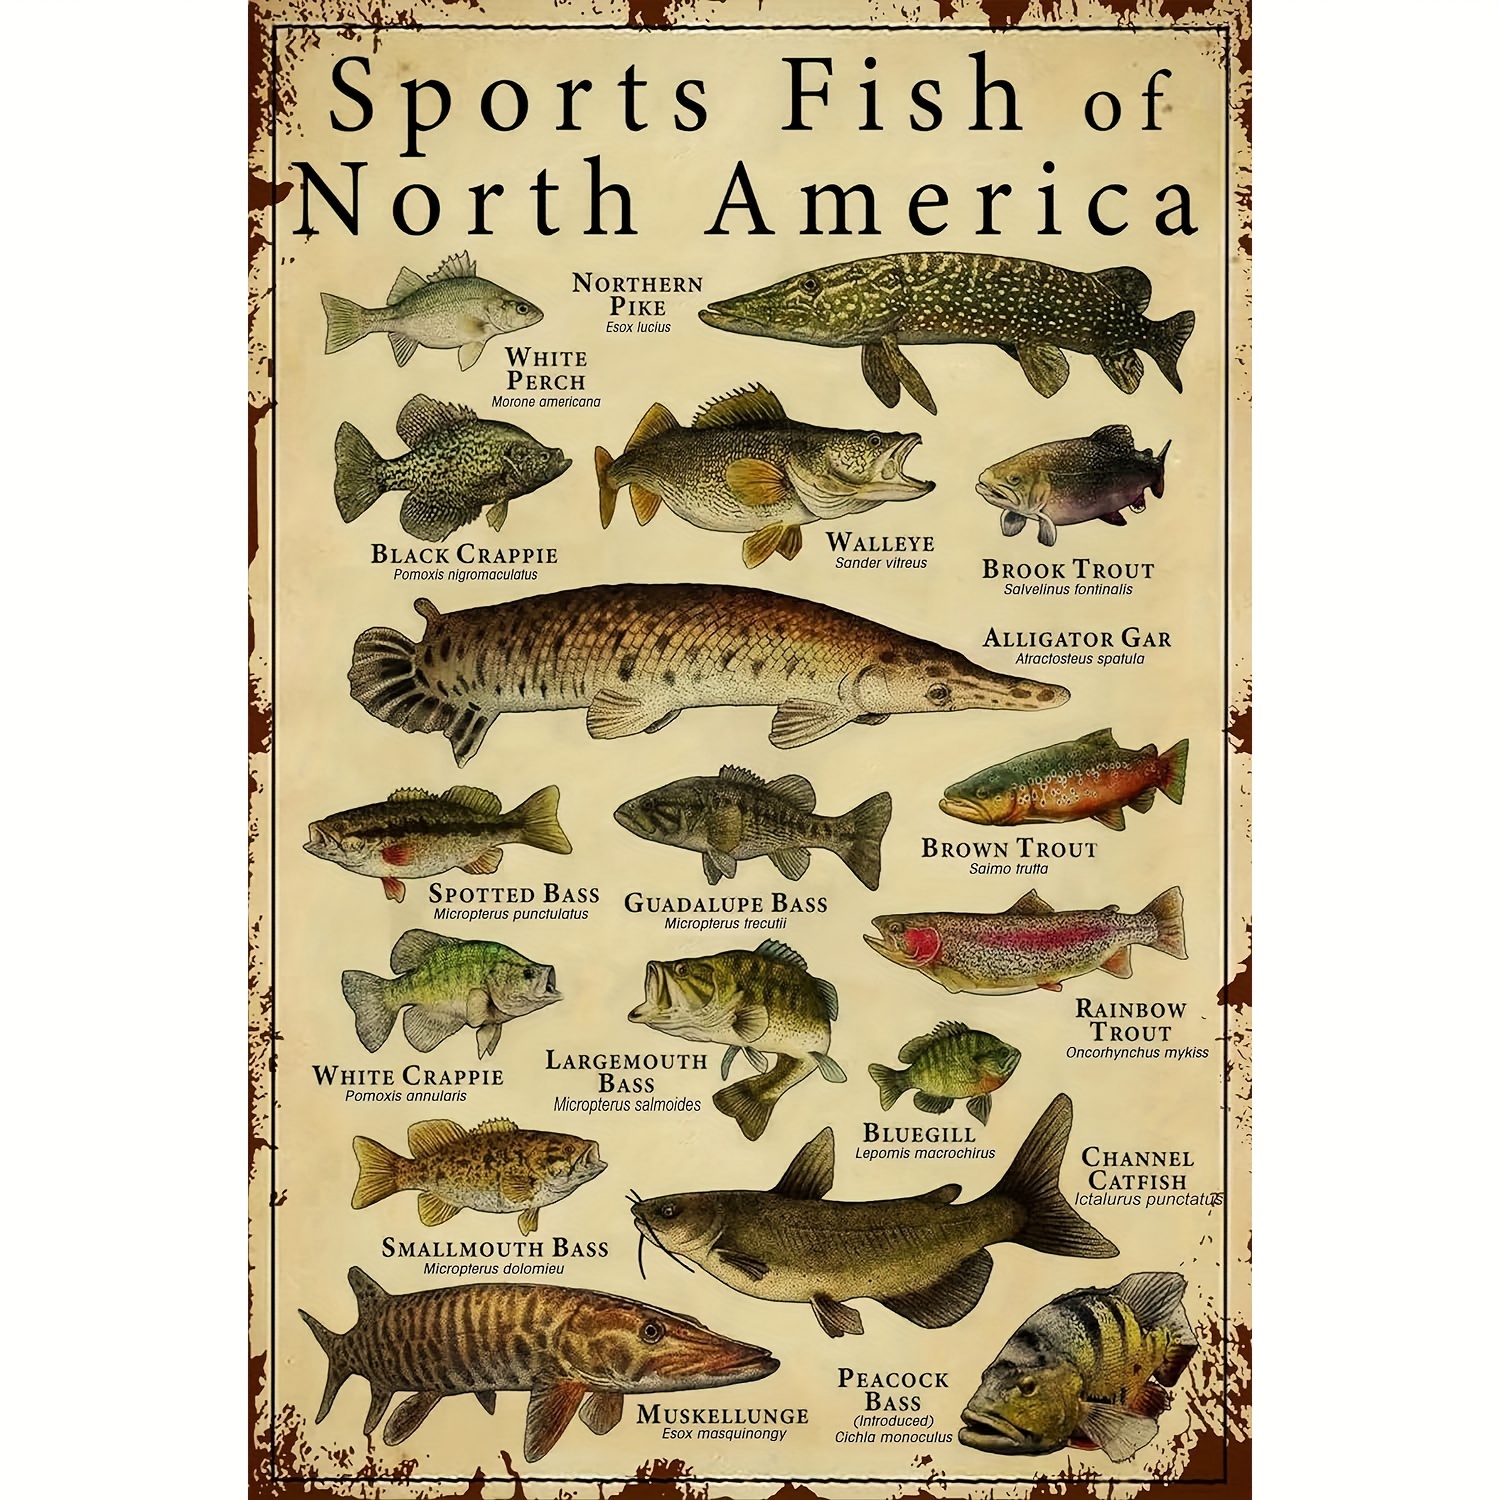 

Metal Fish Knowledge Wall Art Plaque - North American Sport Fish Poster - Educational Hunting Decor For Living Room, Bathroom, Kitchen, Dining Room - Ideal Gift For Fishermen